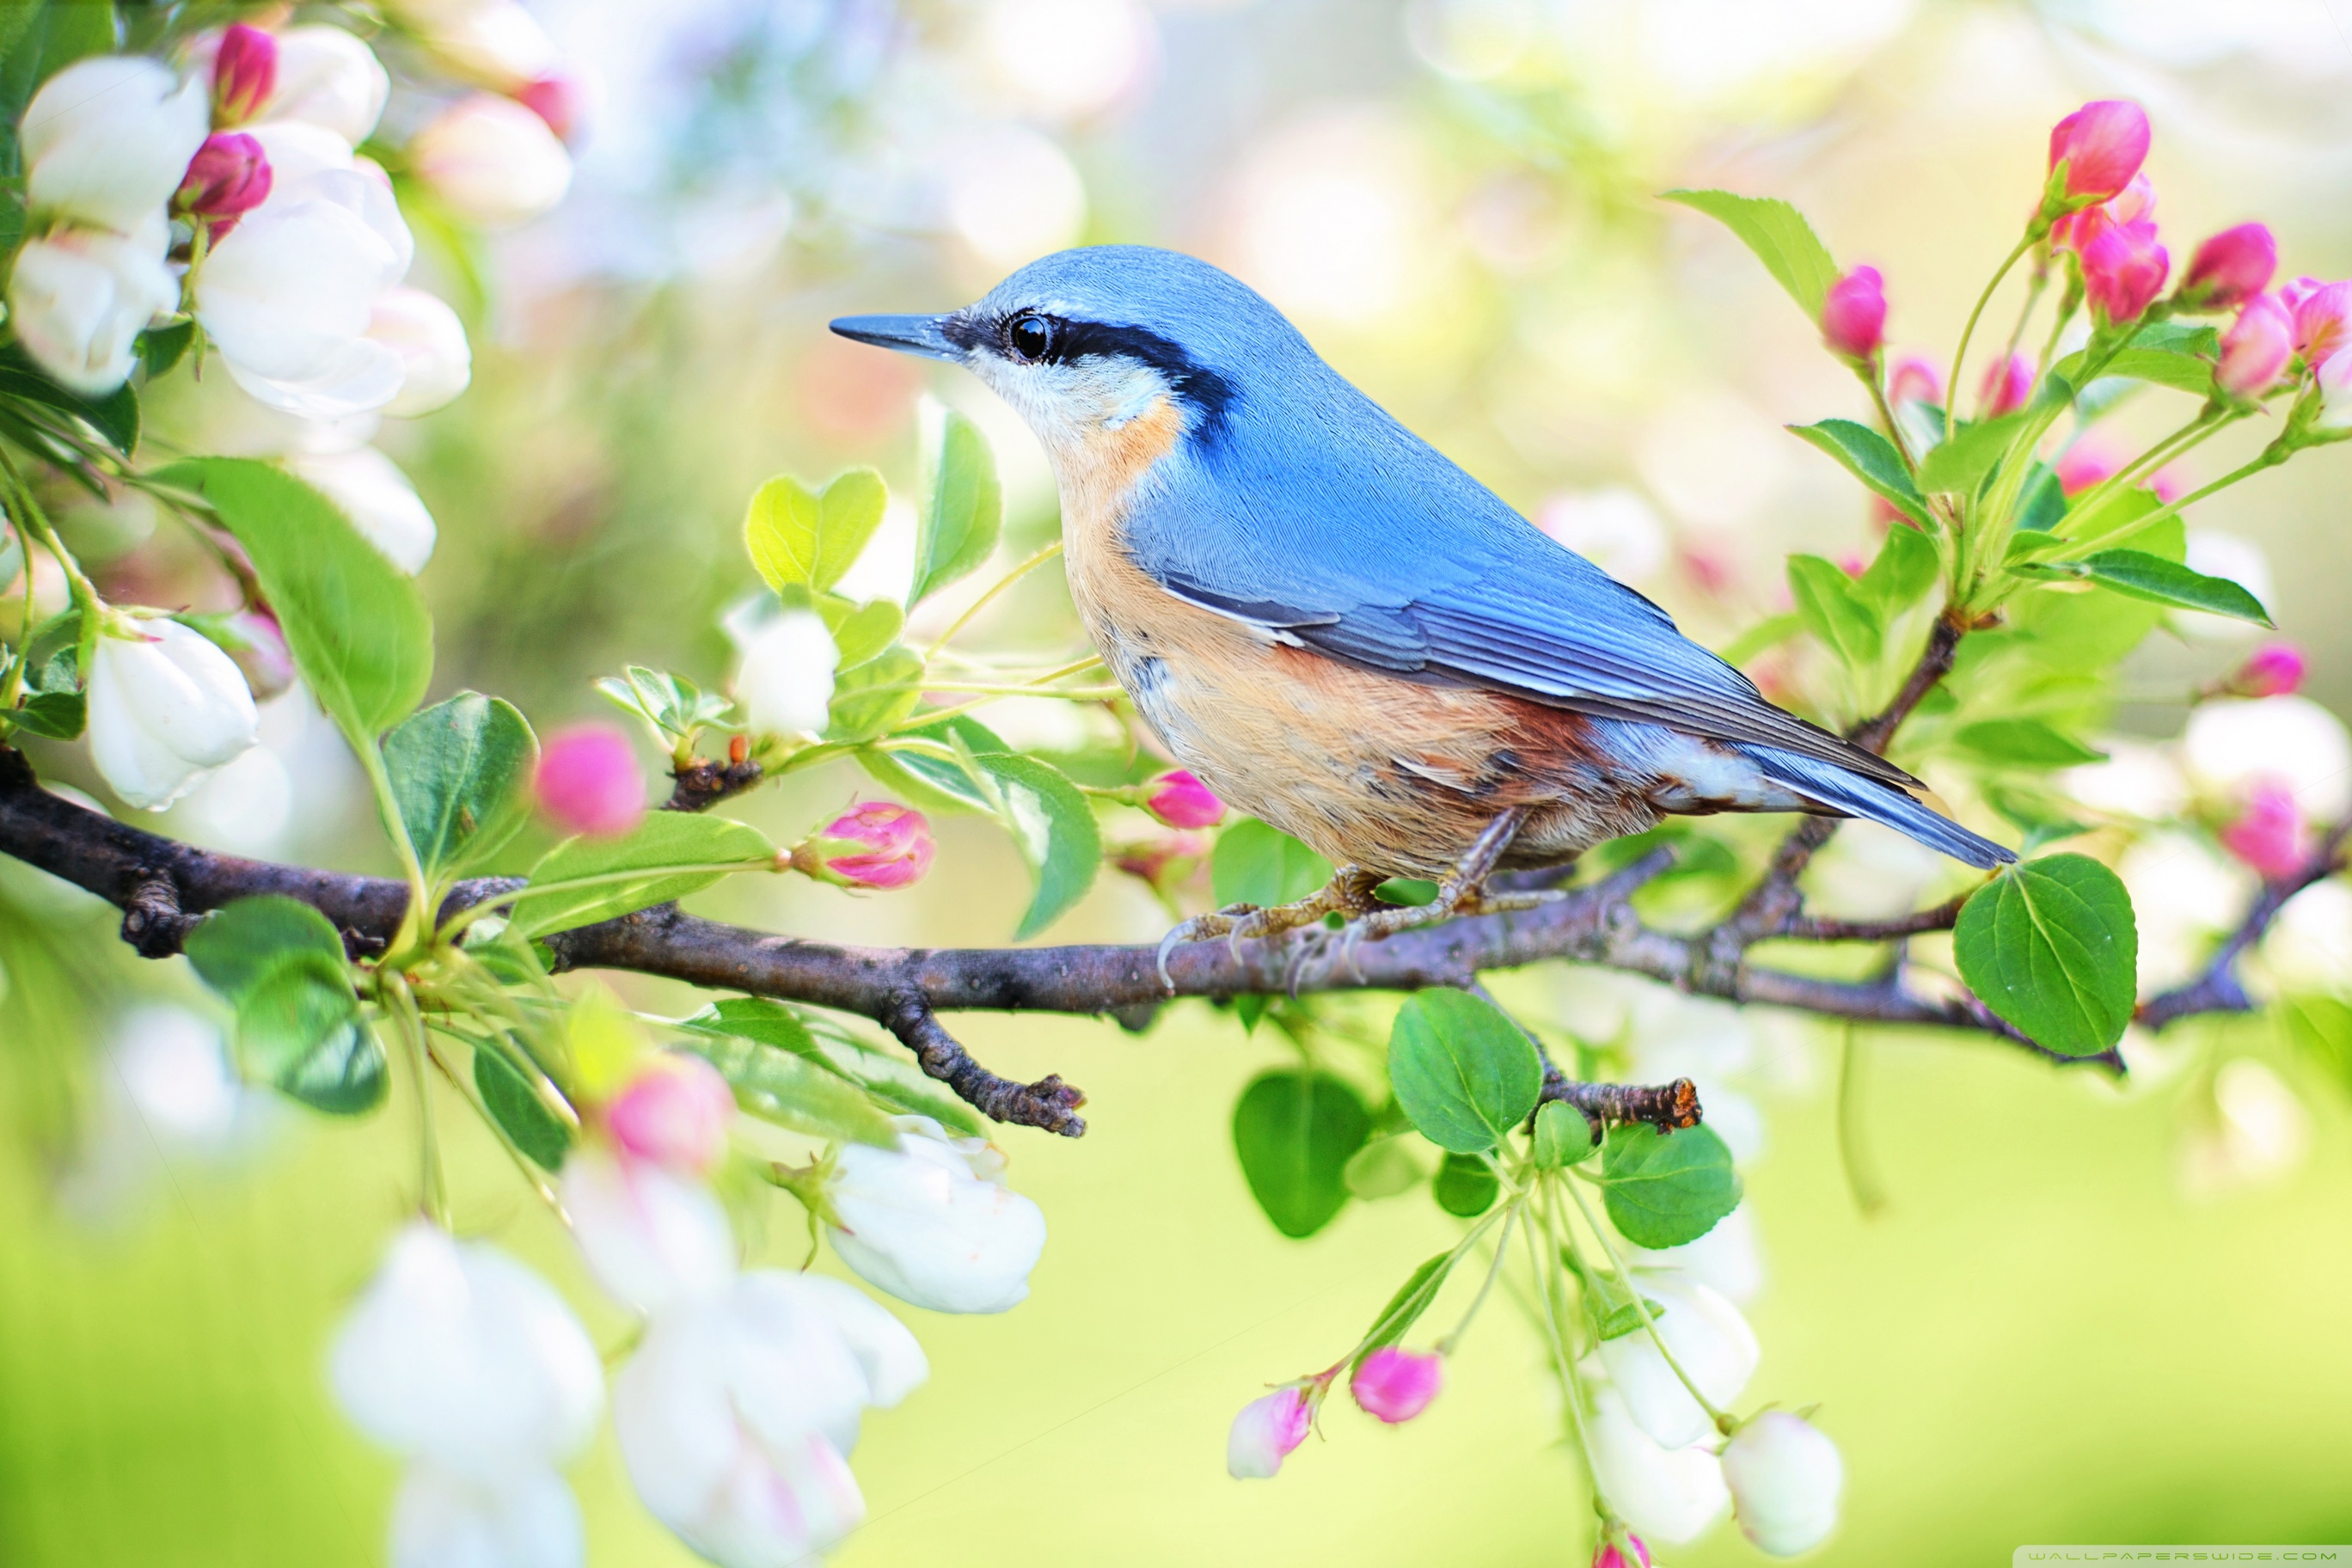 First Day Of Spring In 2019 - HD Wallpaper 